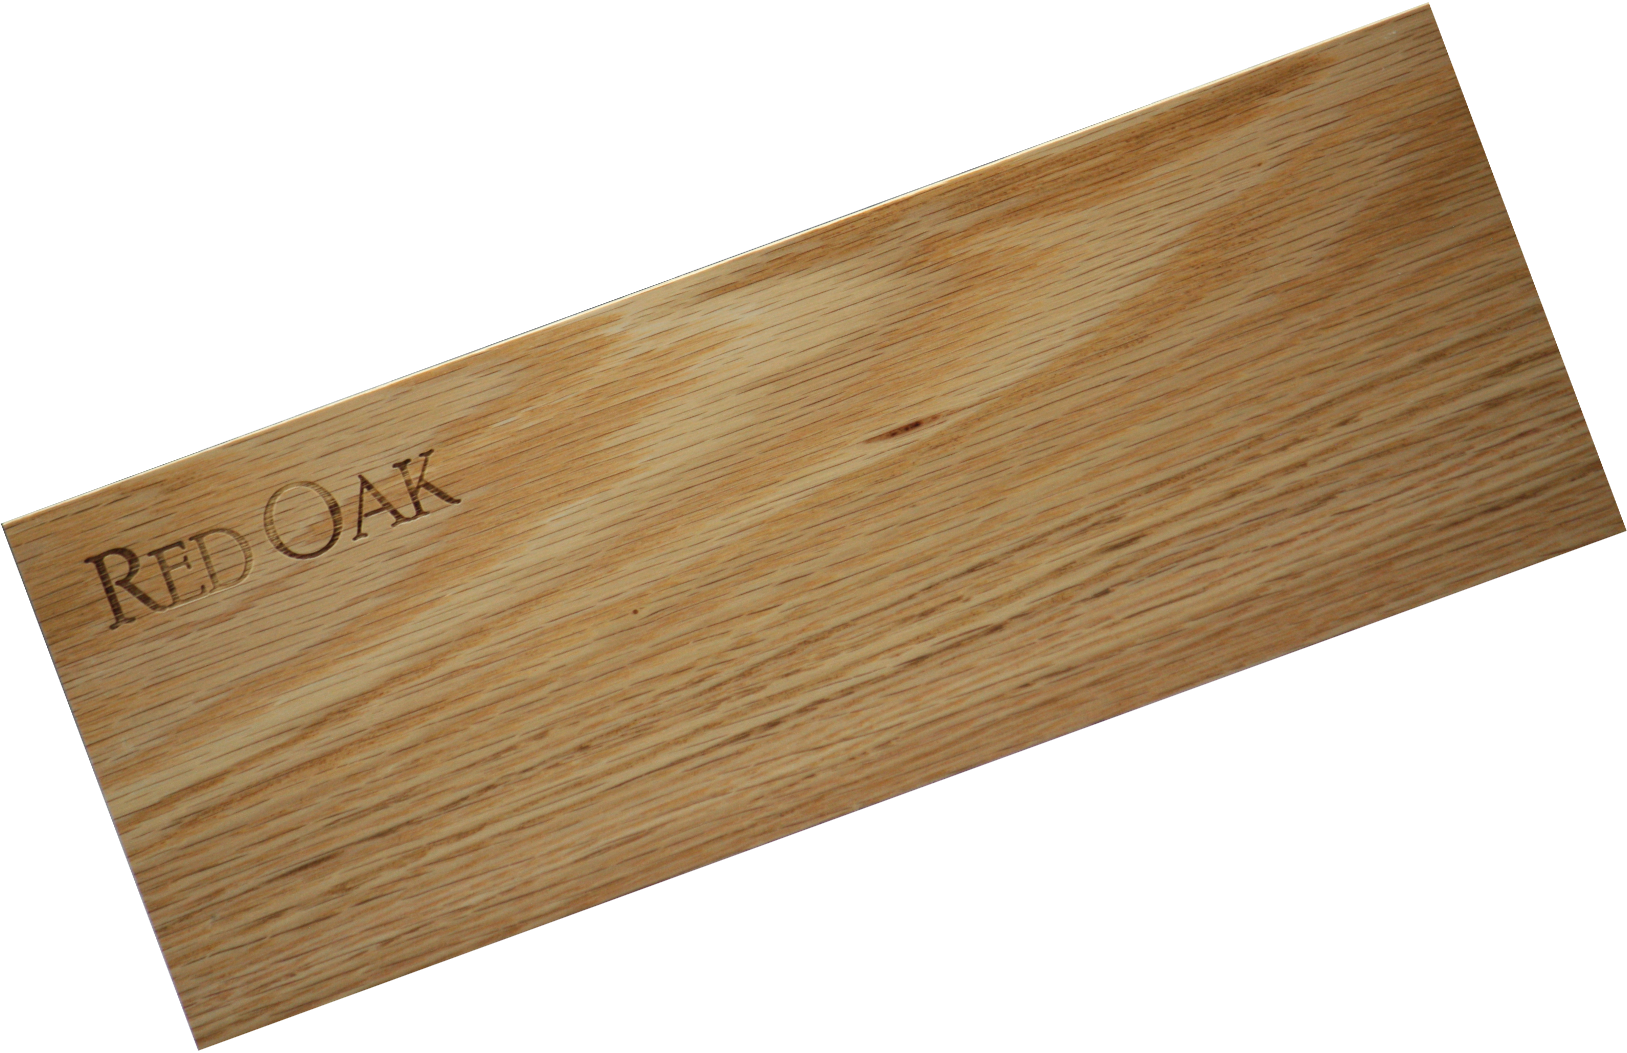 Wood Strip (Red Oak / Hickory) 18" x 24" x  (1/16", 3/32", 1/8", 3/16" or 1/4") 